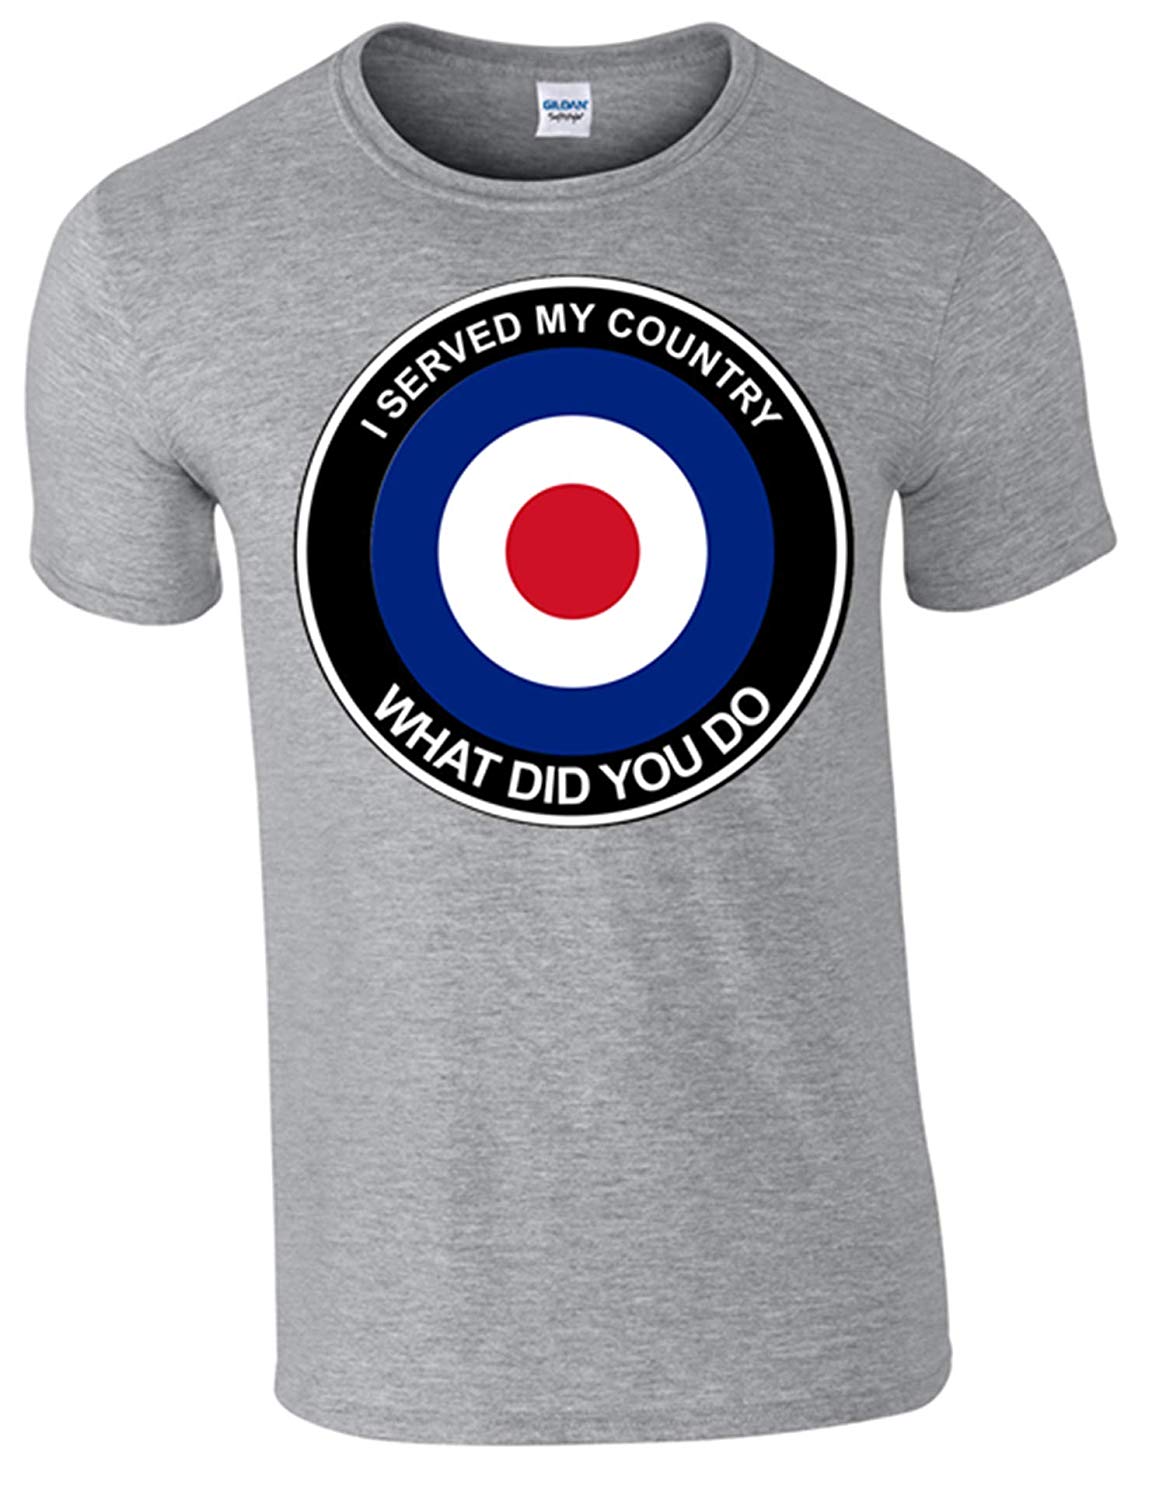 RAF What Did You do T-Shirt - Army 1157 Kit  Veterans Owned Business